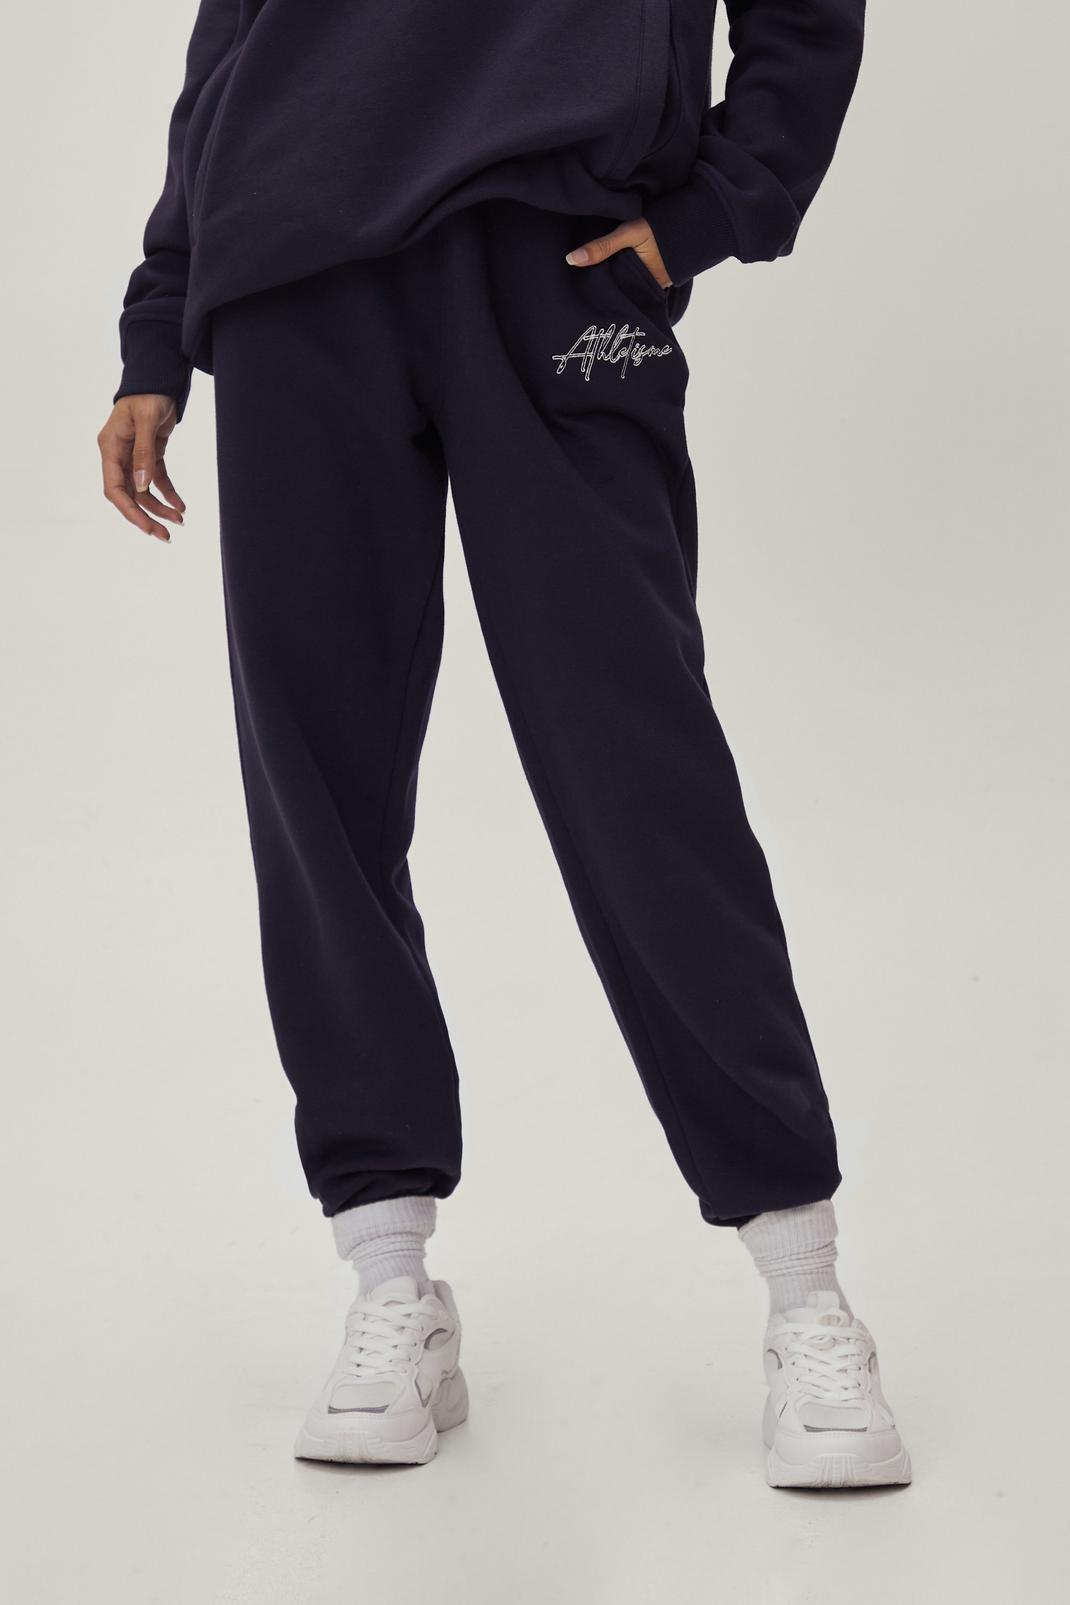 Navy Embroidered Athleisure Relaxed Fit SweatTrousers image number 1